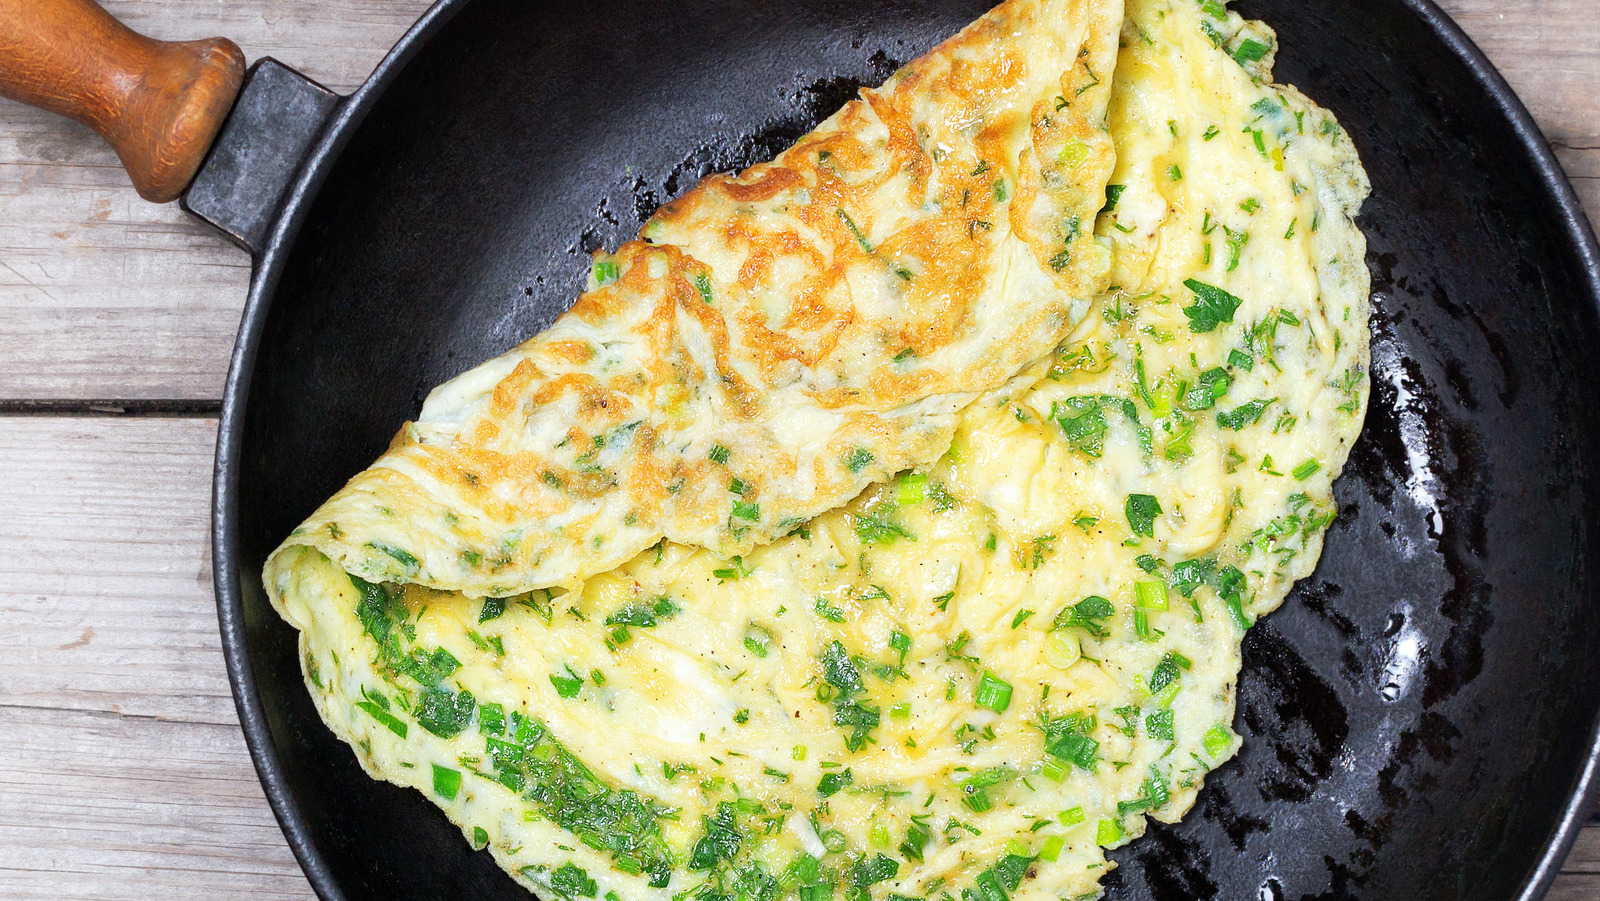 https://www.tastingtable.com/img/gallery/13-tips-for-making-the-absolute-best-omelets/l-intro-1667865750.jpg